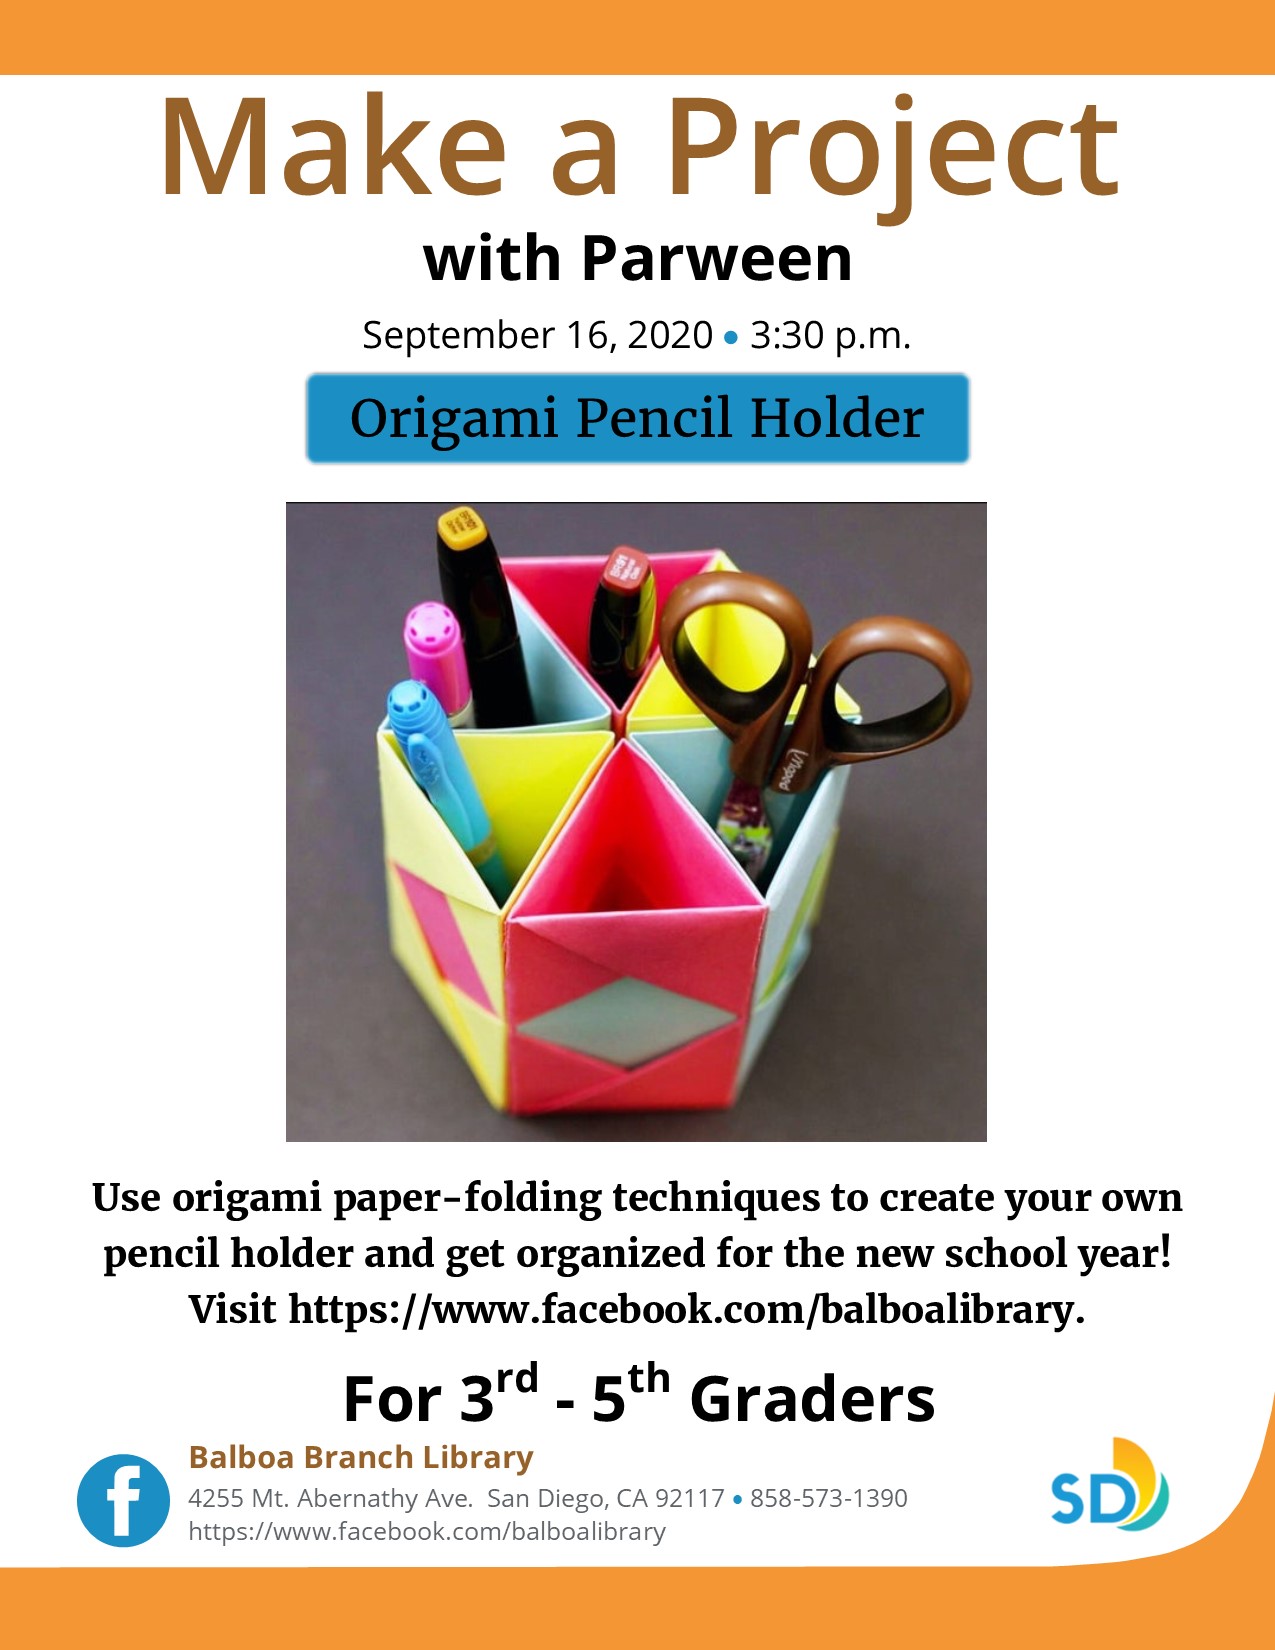 Flyer with picture of origami pencil holder